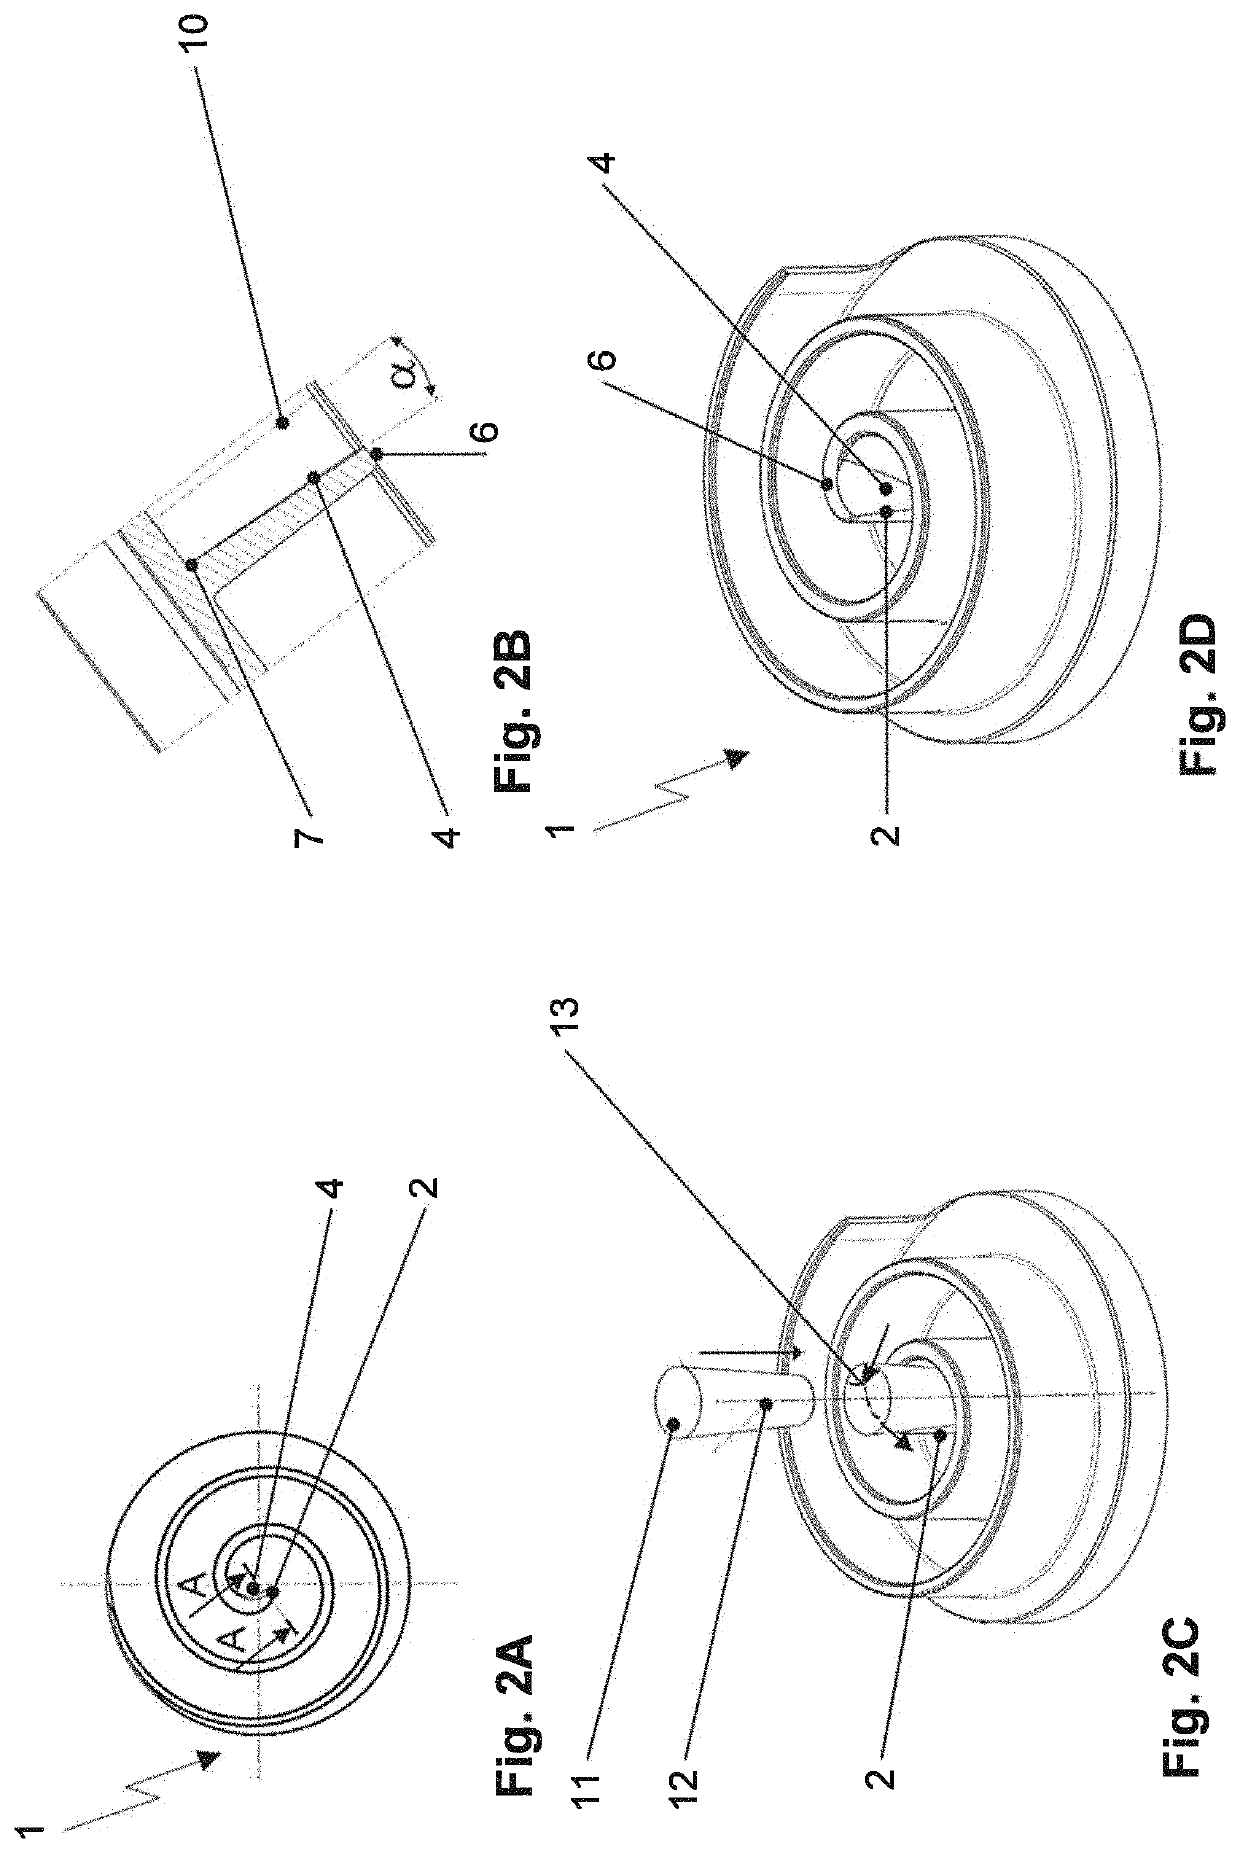 Scroll compressor for a vehicle air-conditioning system having spiral wall including conical cut